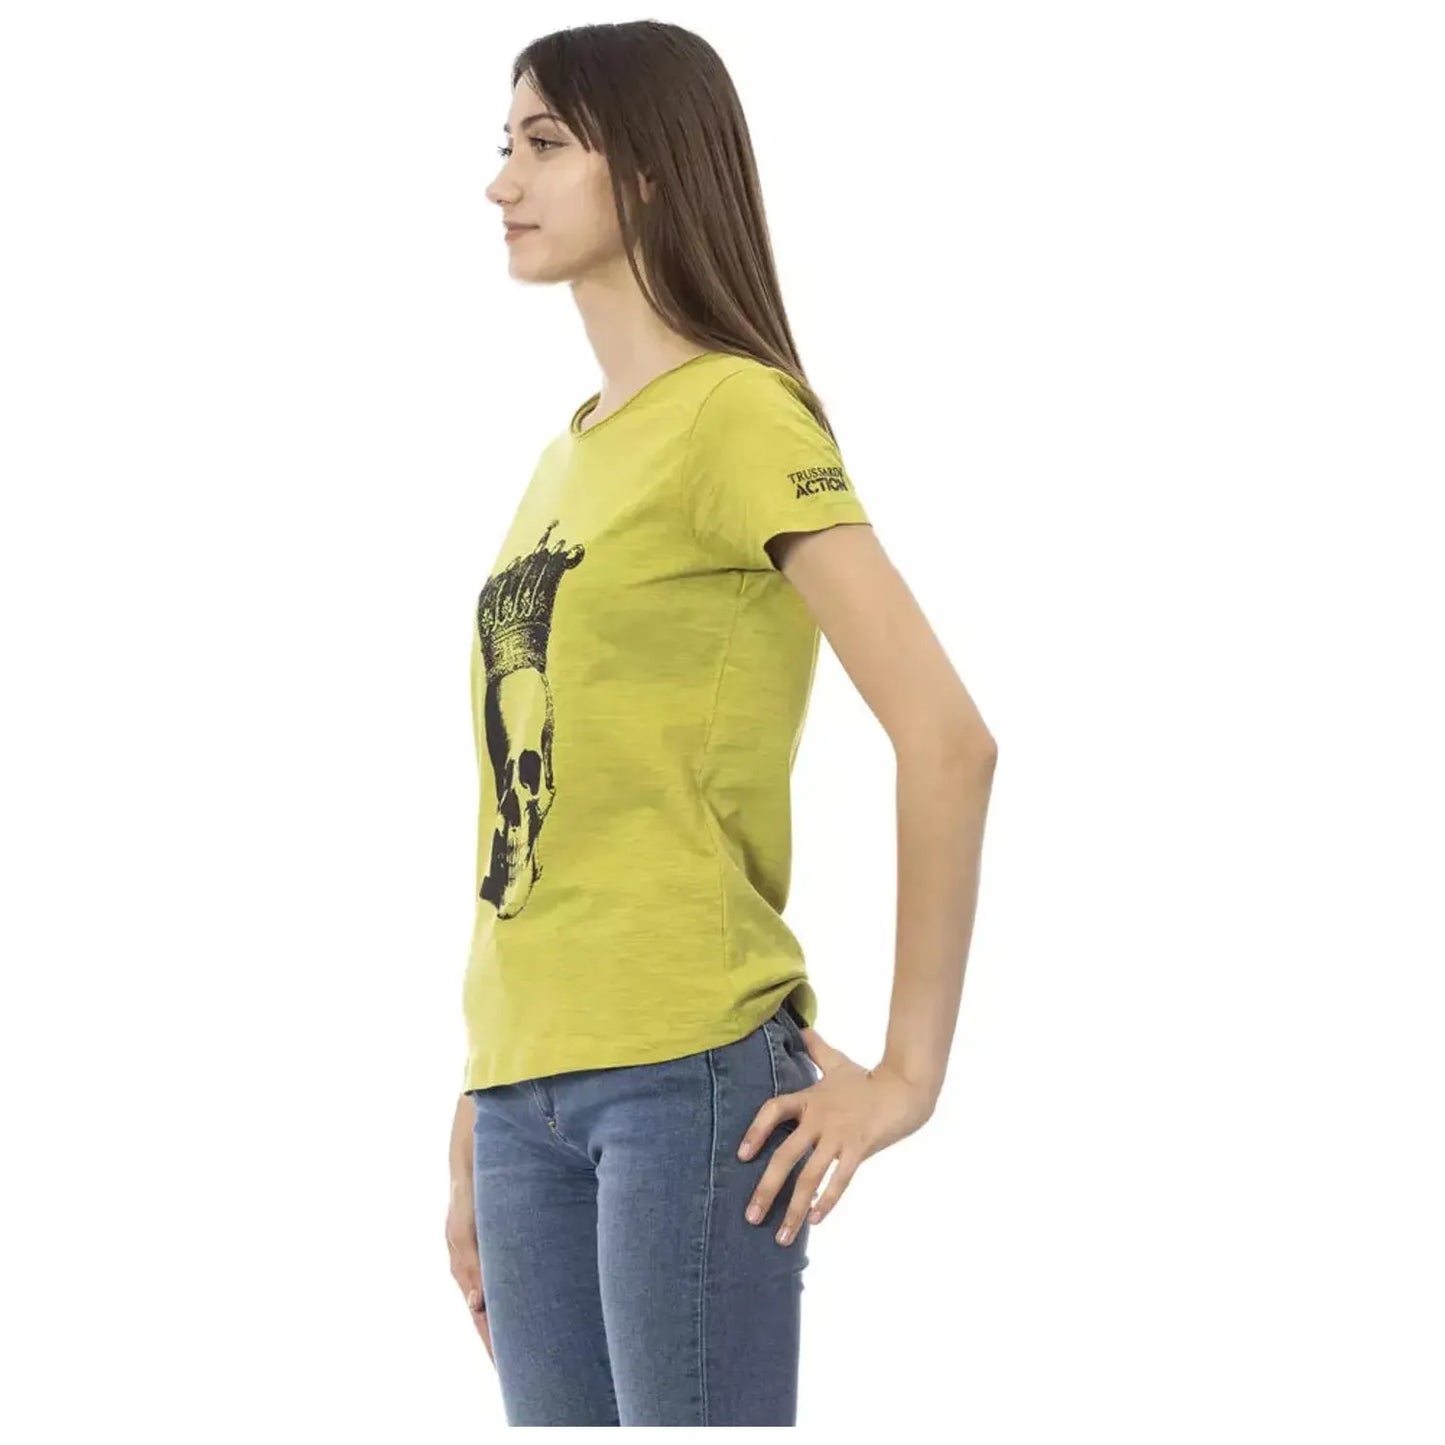 Trussardi Action Chic Green Short Sleeve Tee with Unique Front Print green-cotton-tops-t-shirt-12